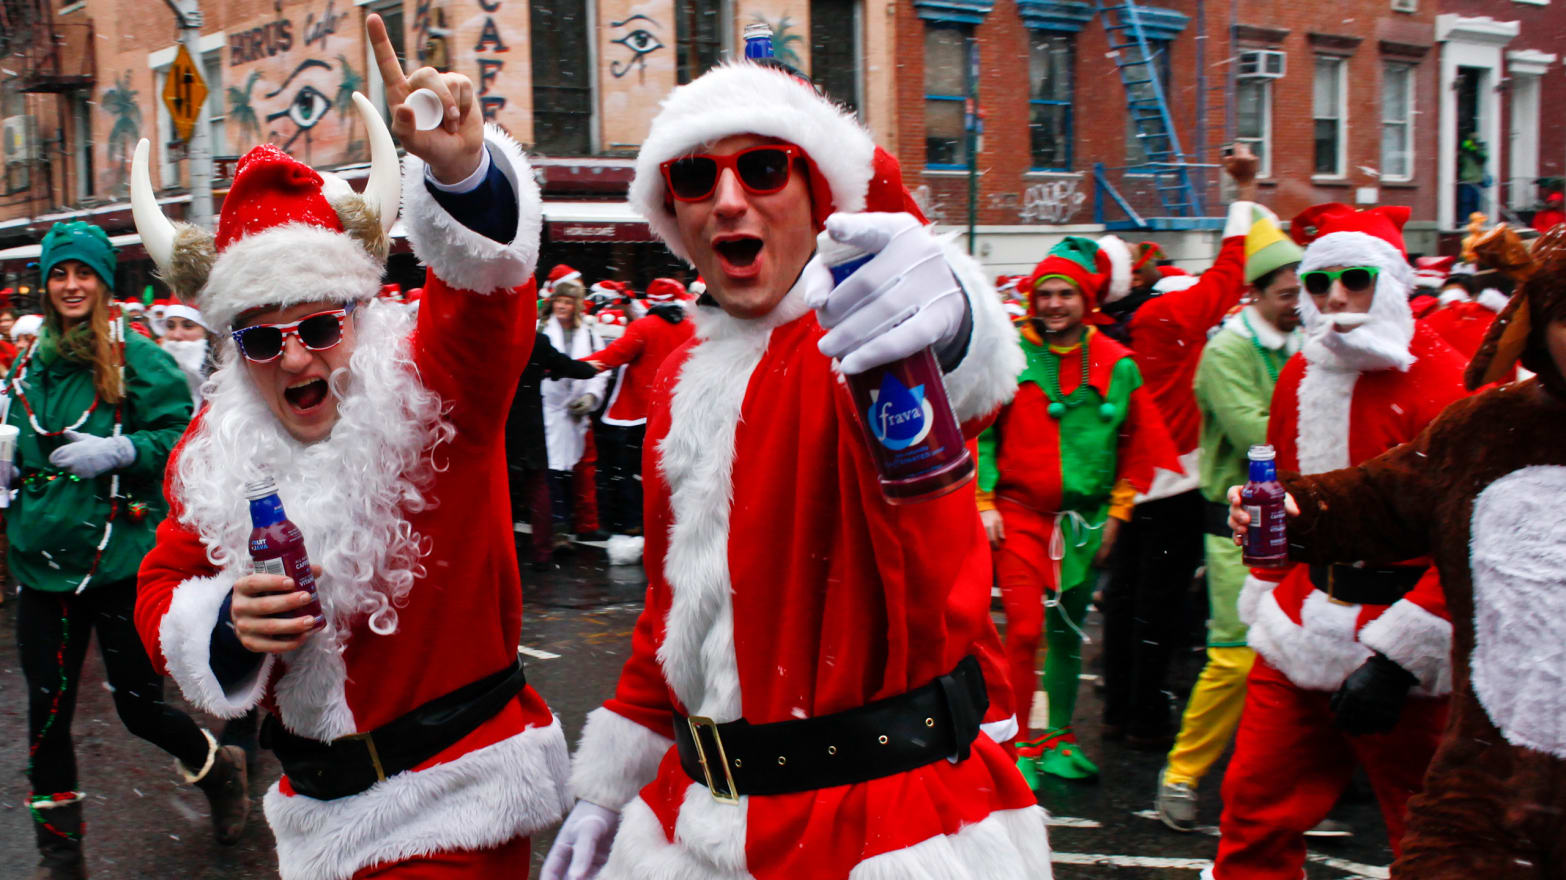 Before The Bros Santacon Was As An Anti Corporate Protest